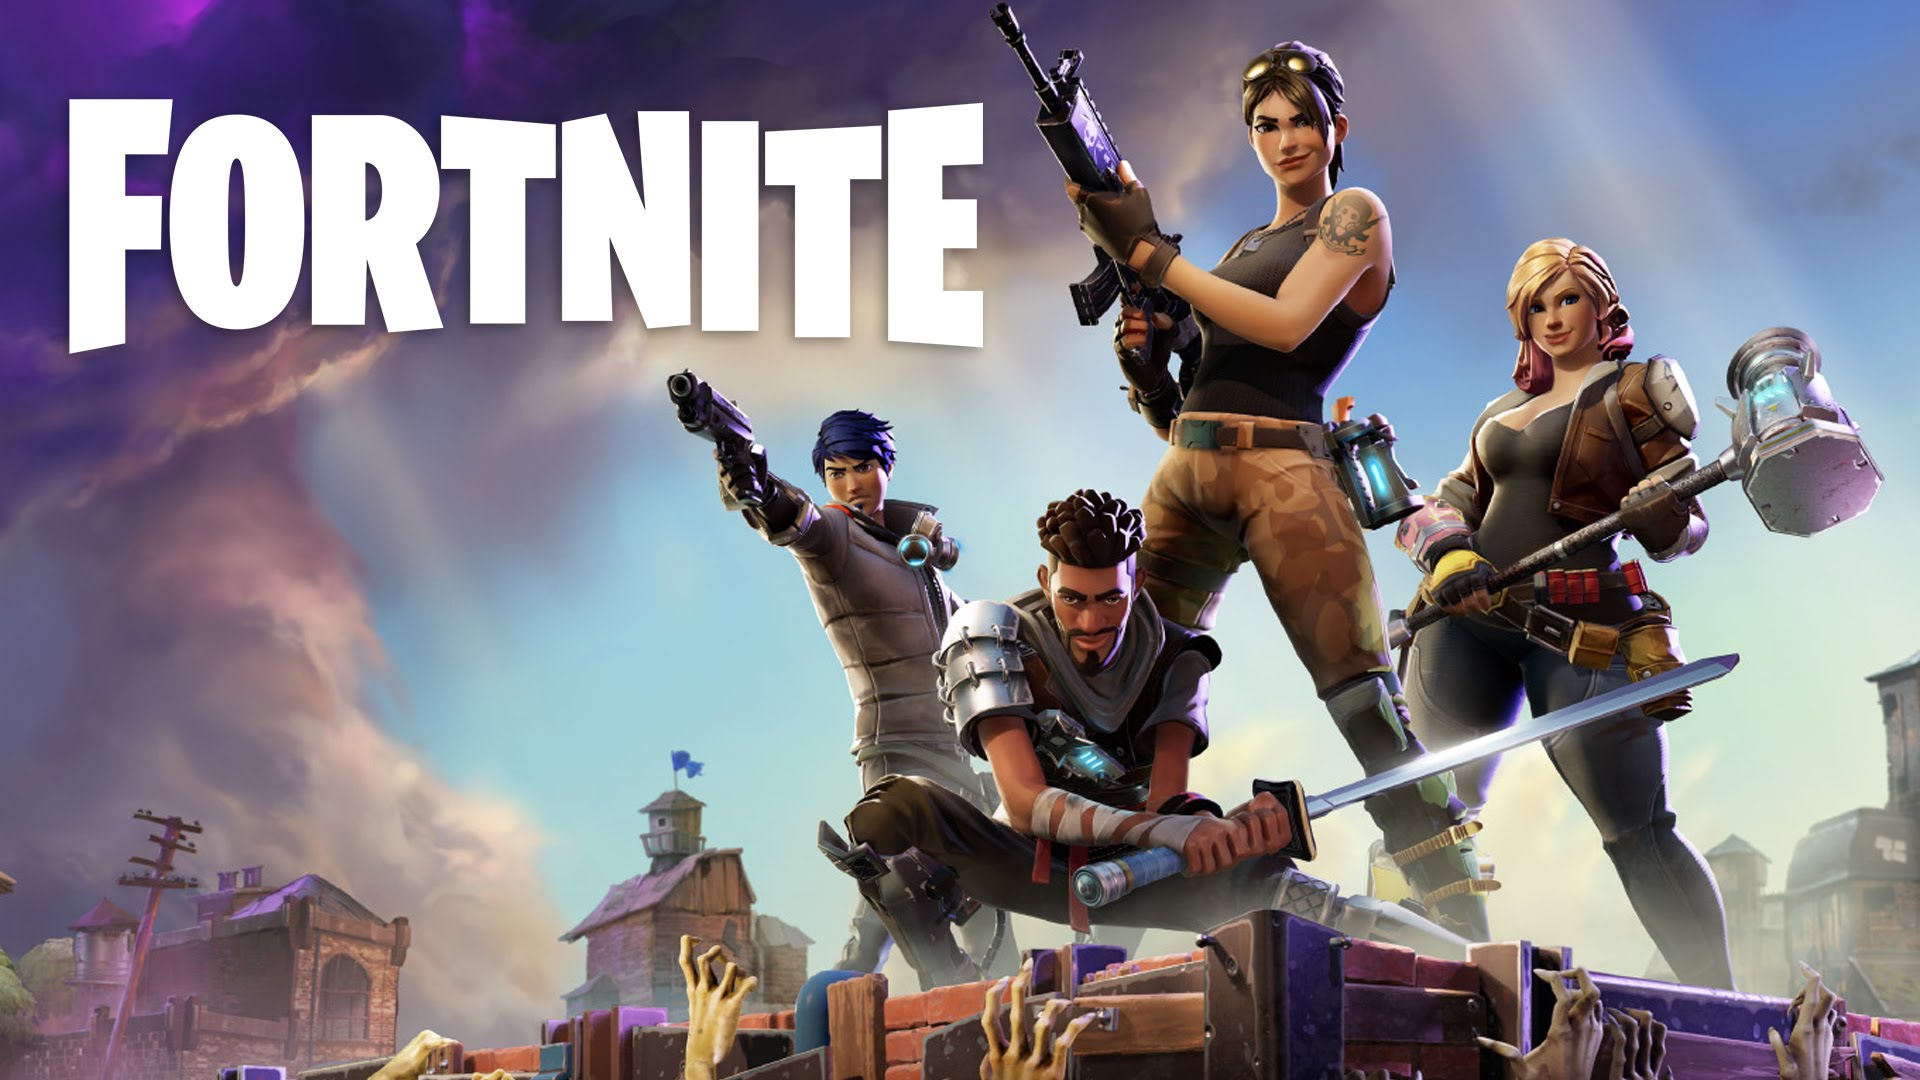 No plans for Fortnite: Save the World on Switch - Nintendo Everything